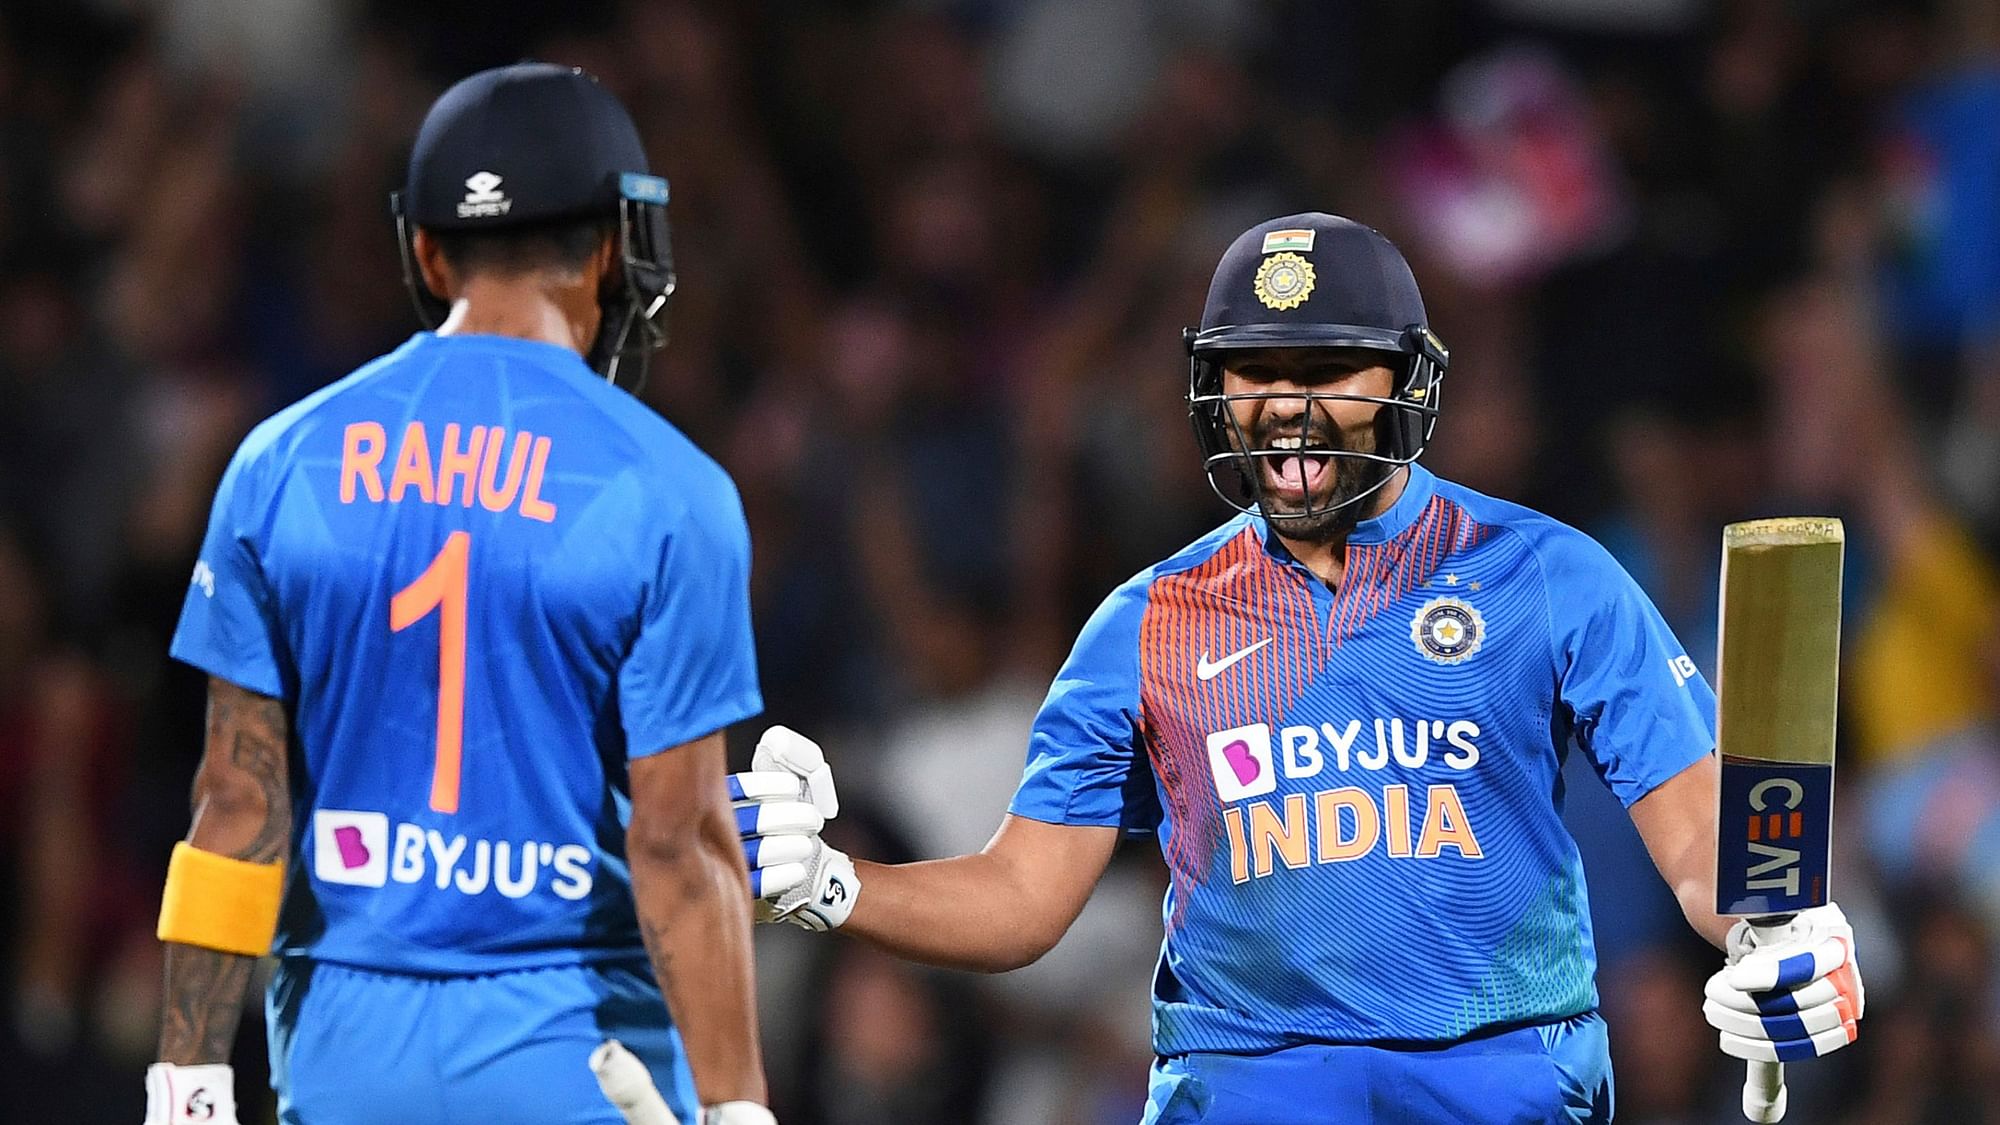 Rohit Sharma leads team India to their 1st T20 series win in NZ by hitting two consecutive winning sixes in the super over.